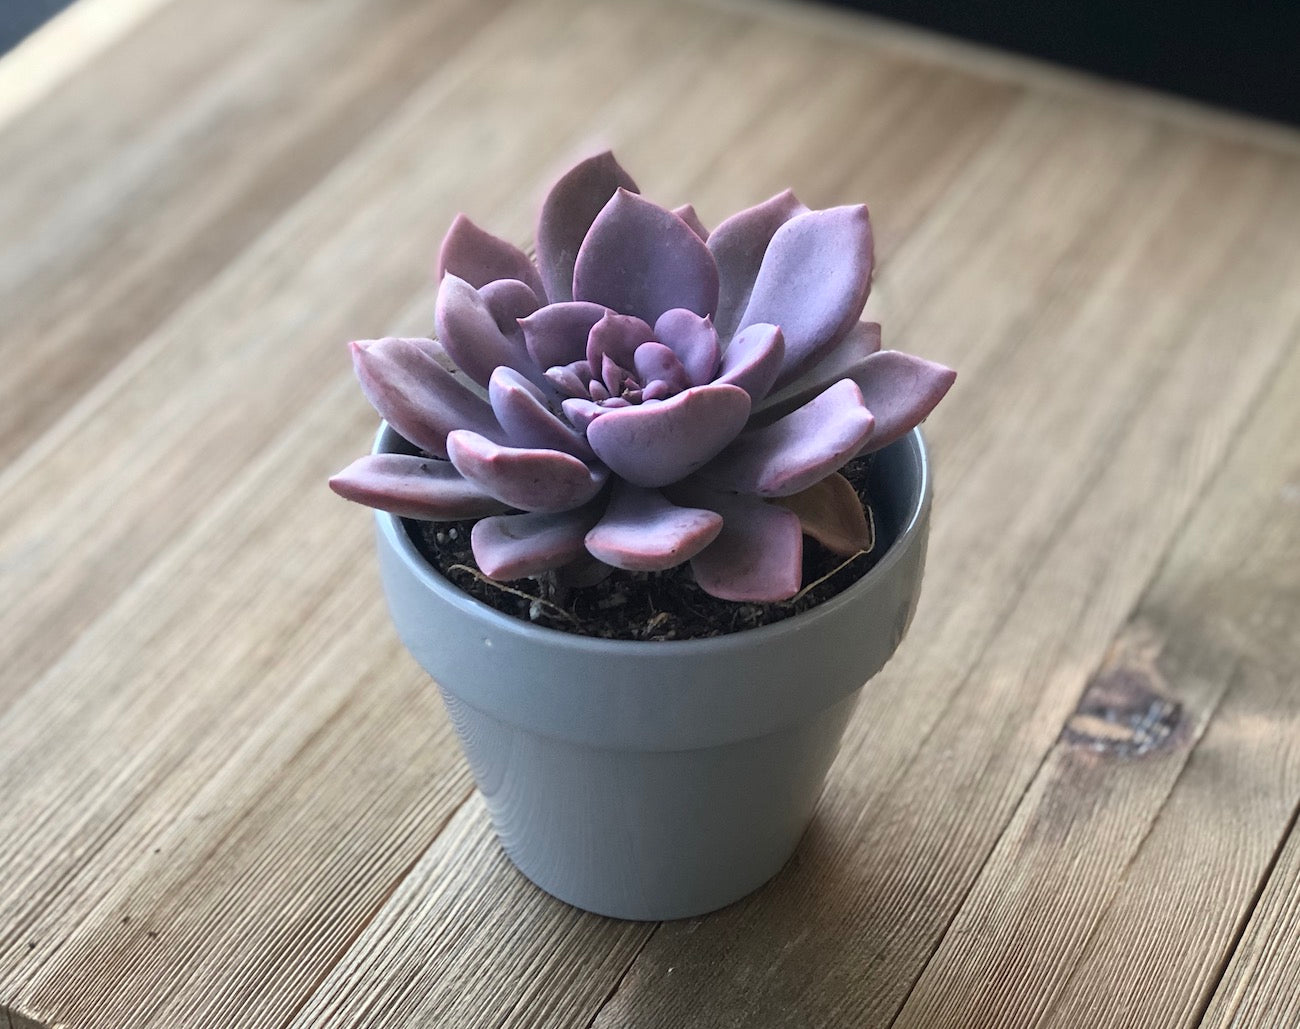 Graptoveria Debbie looks great in potted containers